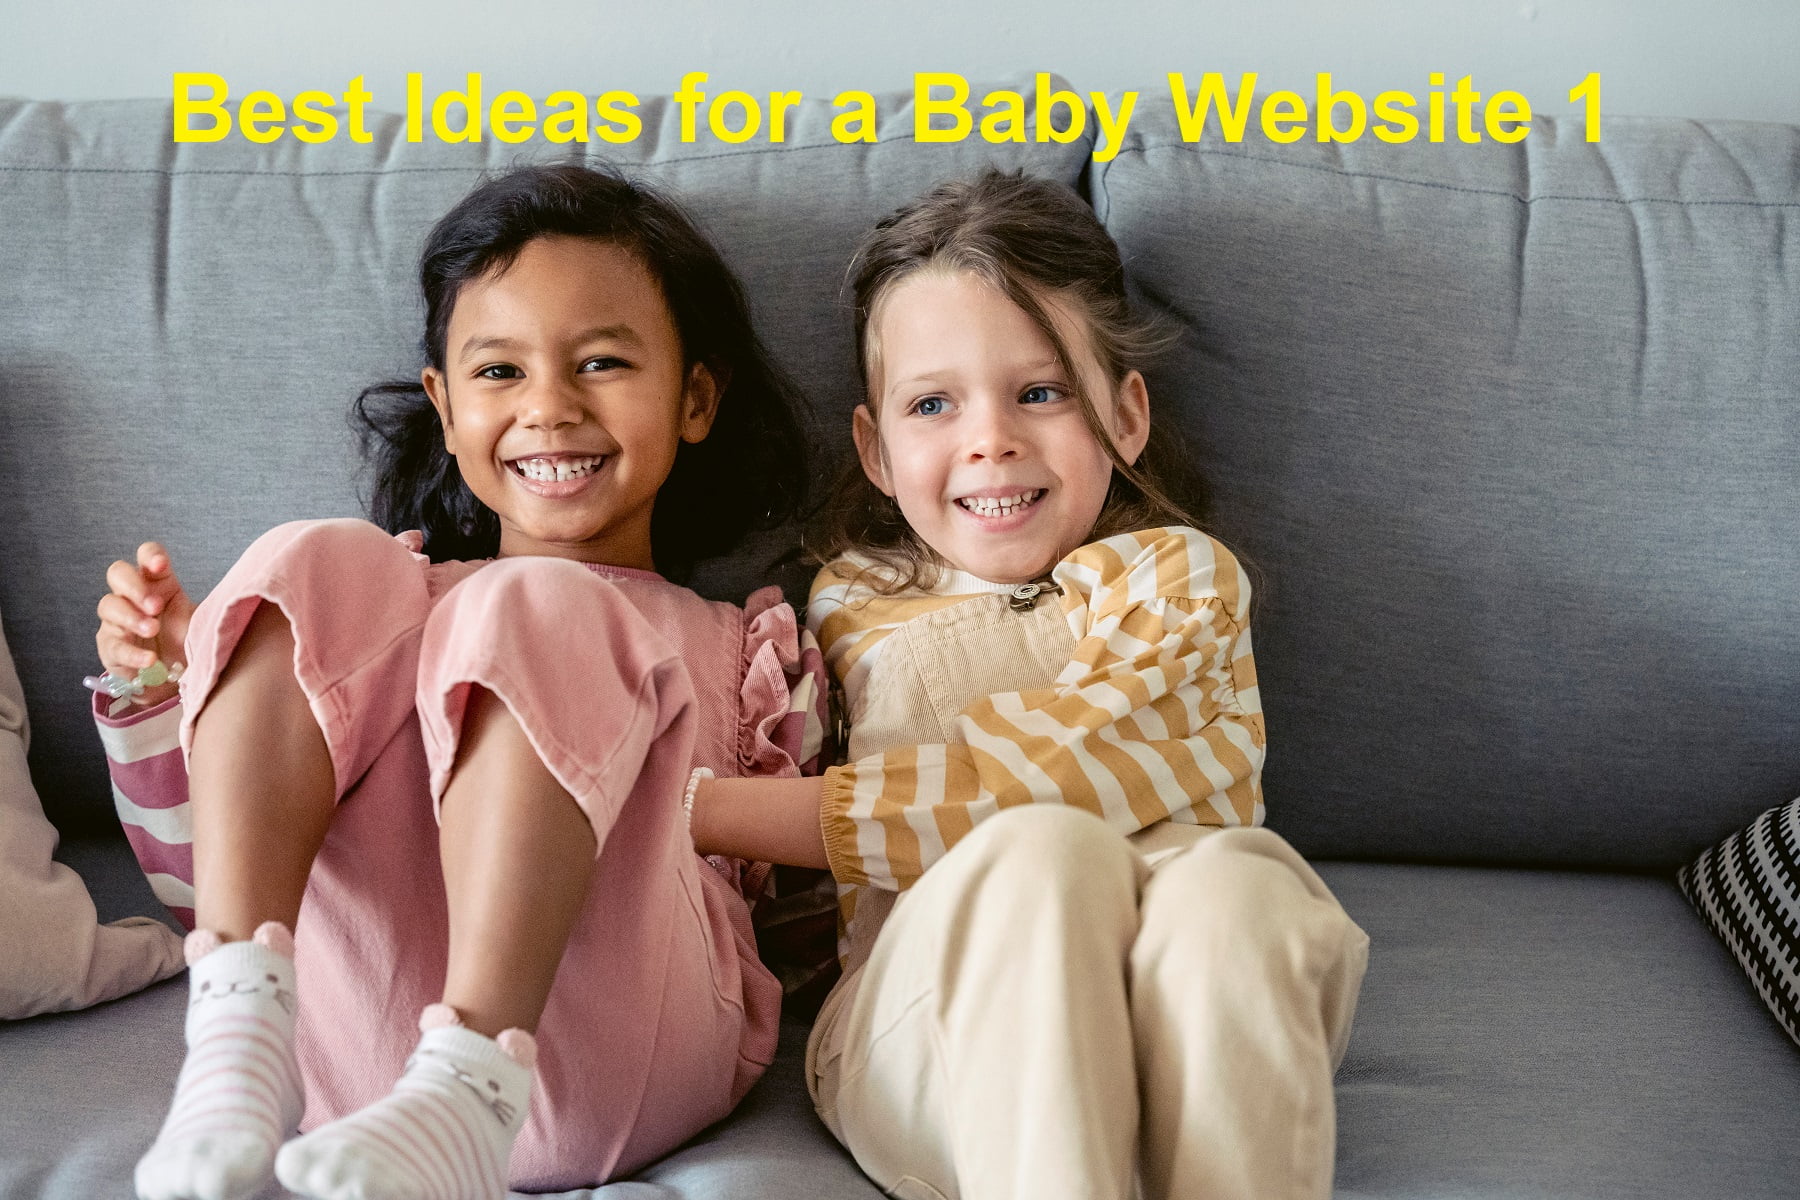 Best Ideas for a Baby Website 1